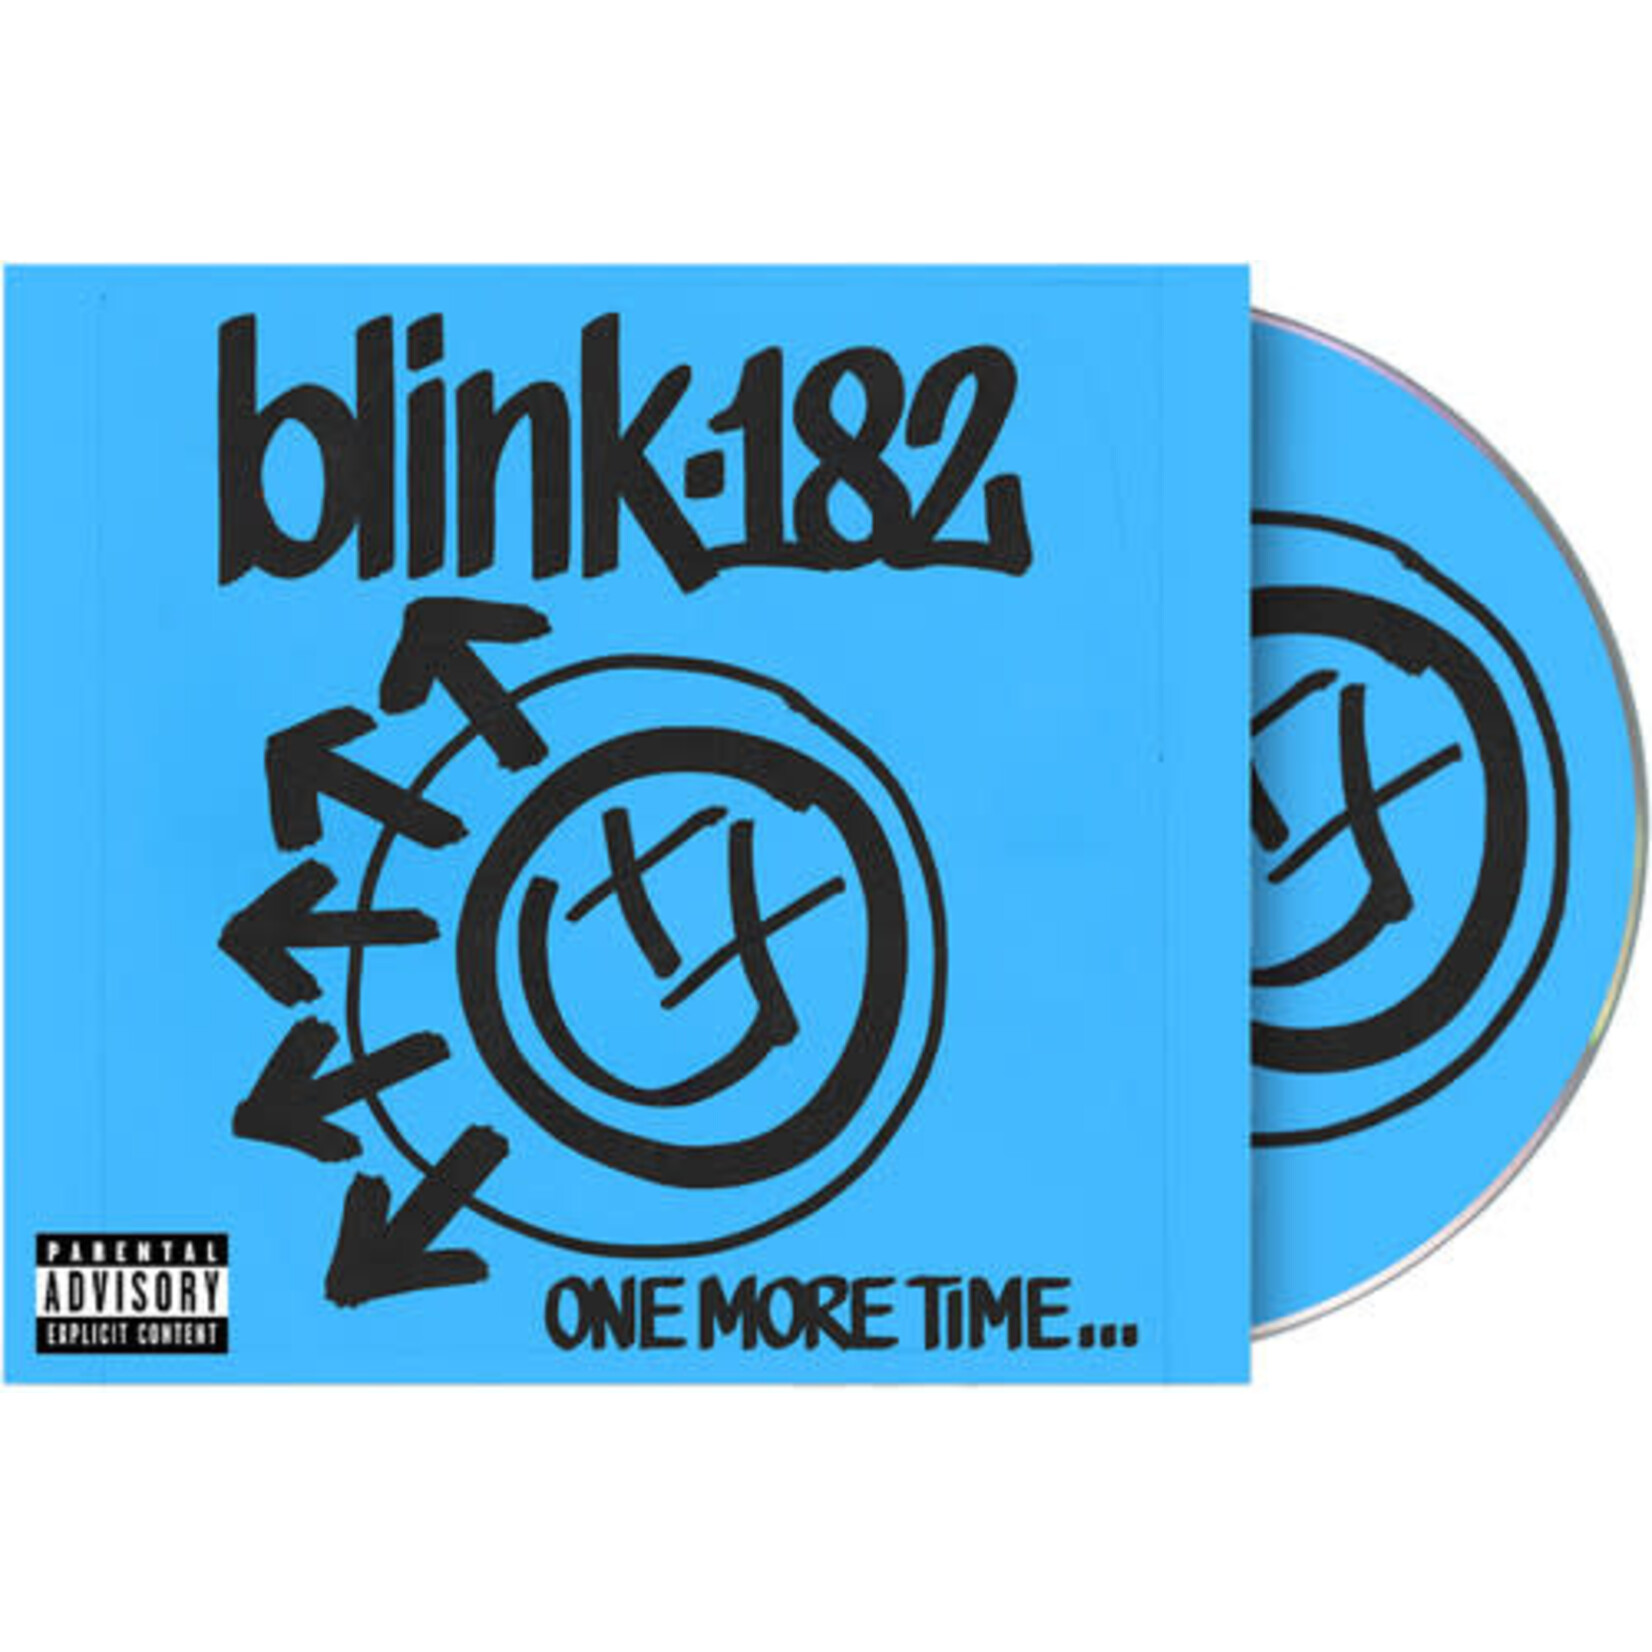 Sony Blink-182 - One More Time (CD)